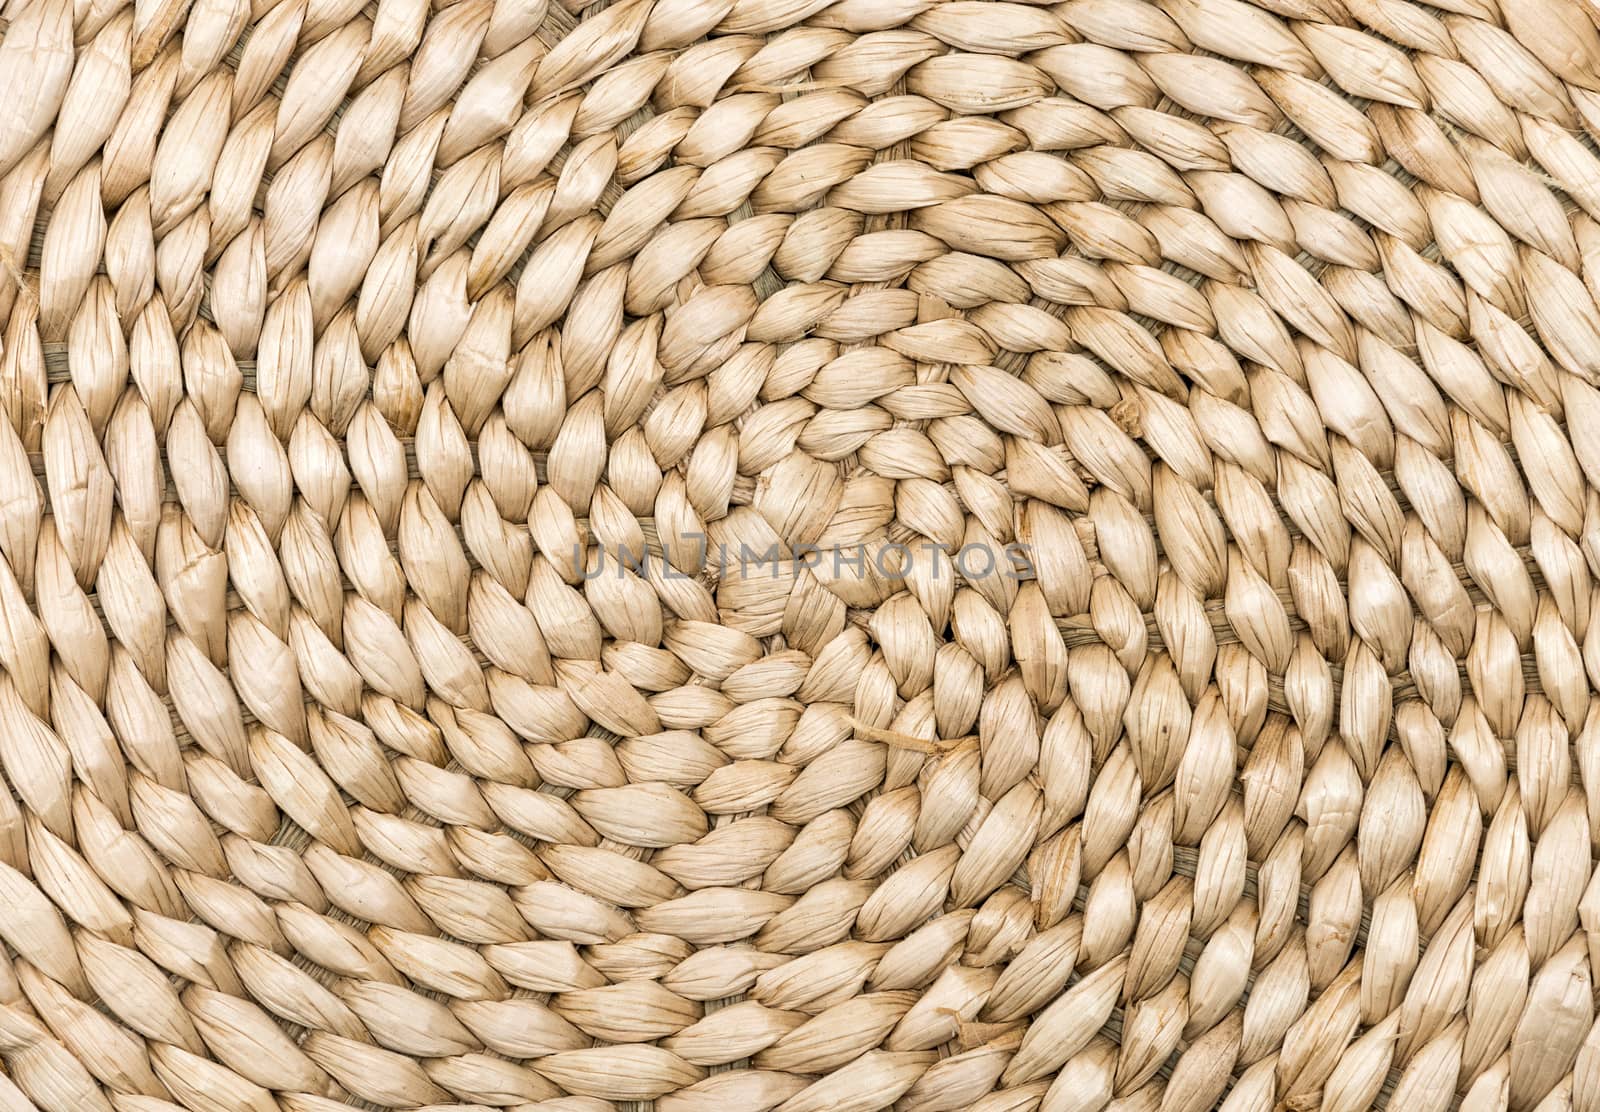 Wicker texture has made. circle